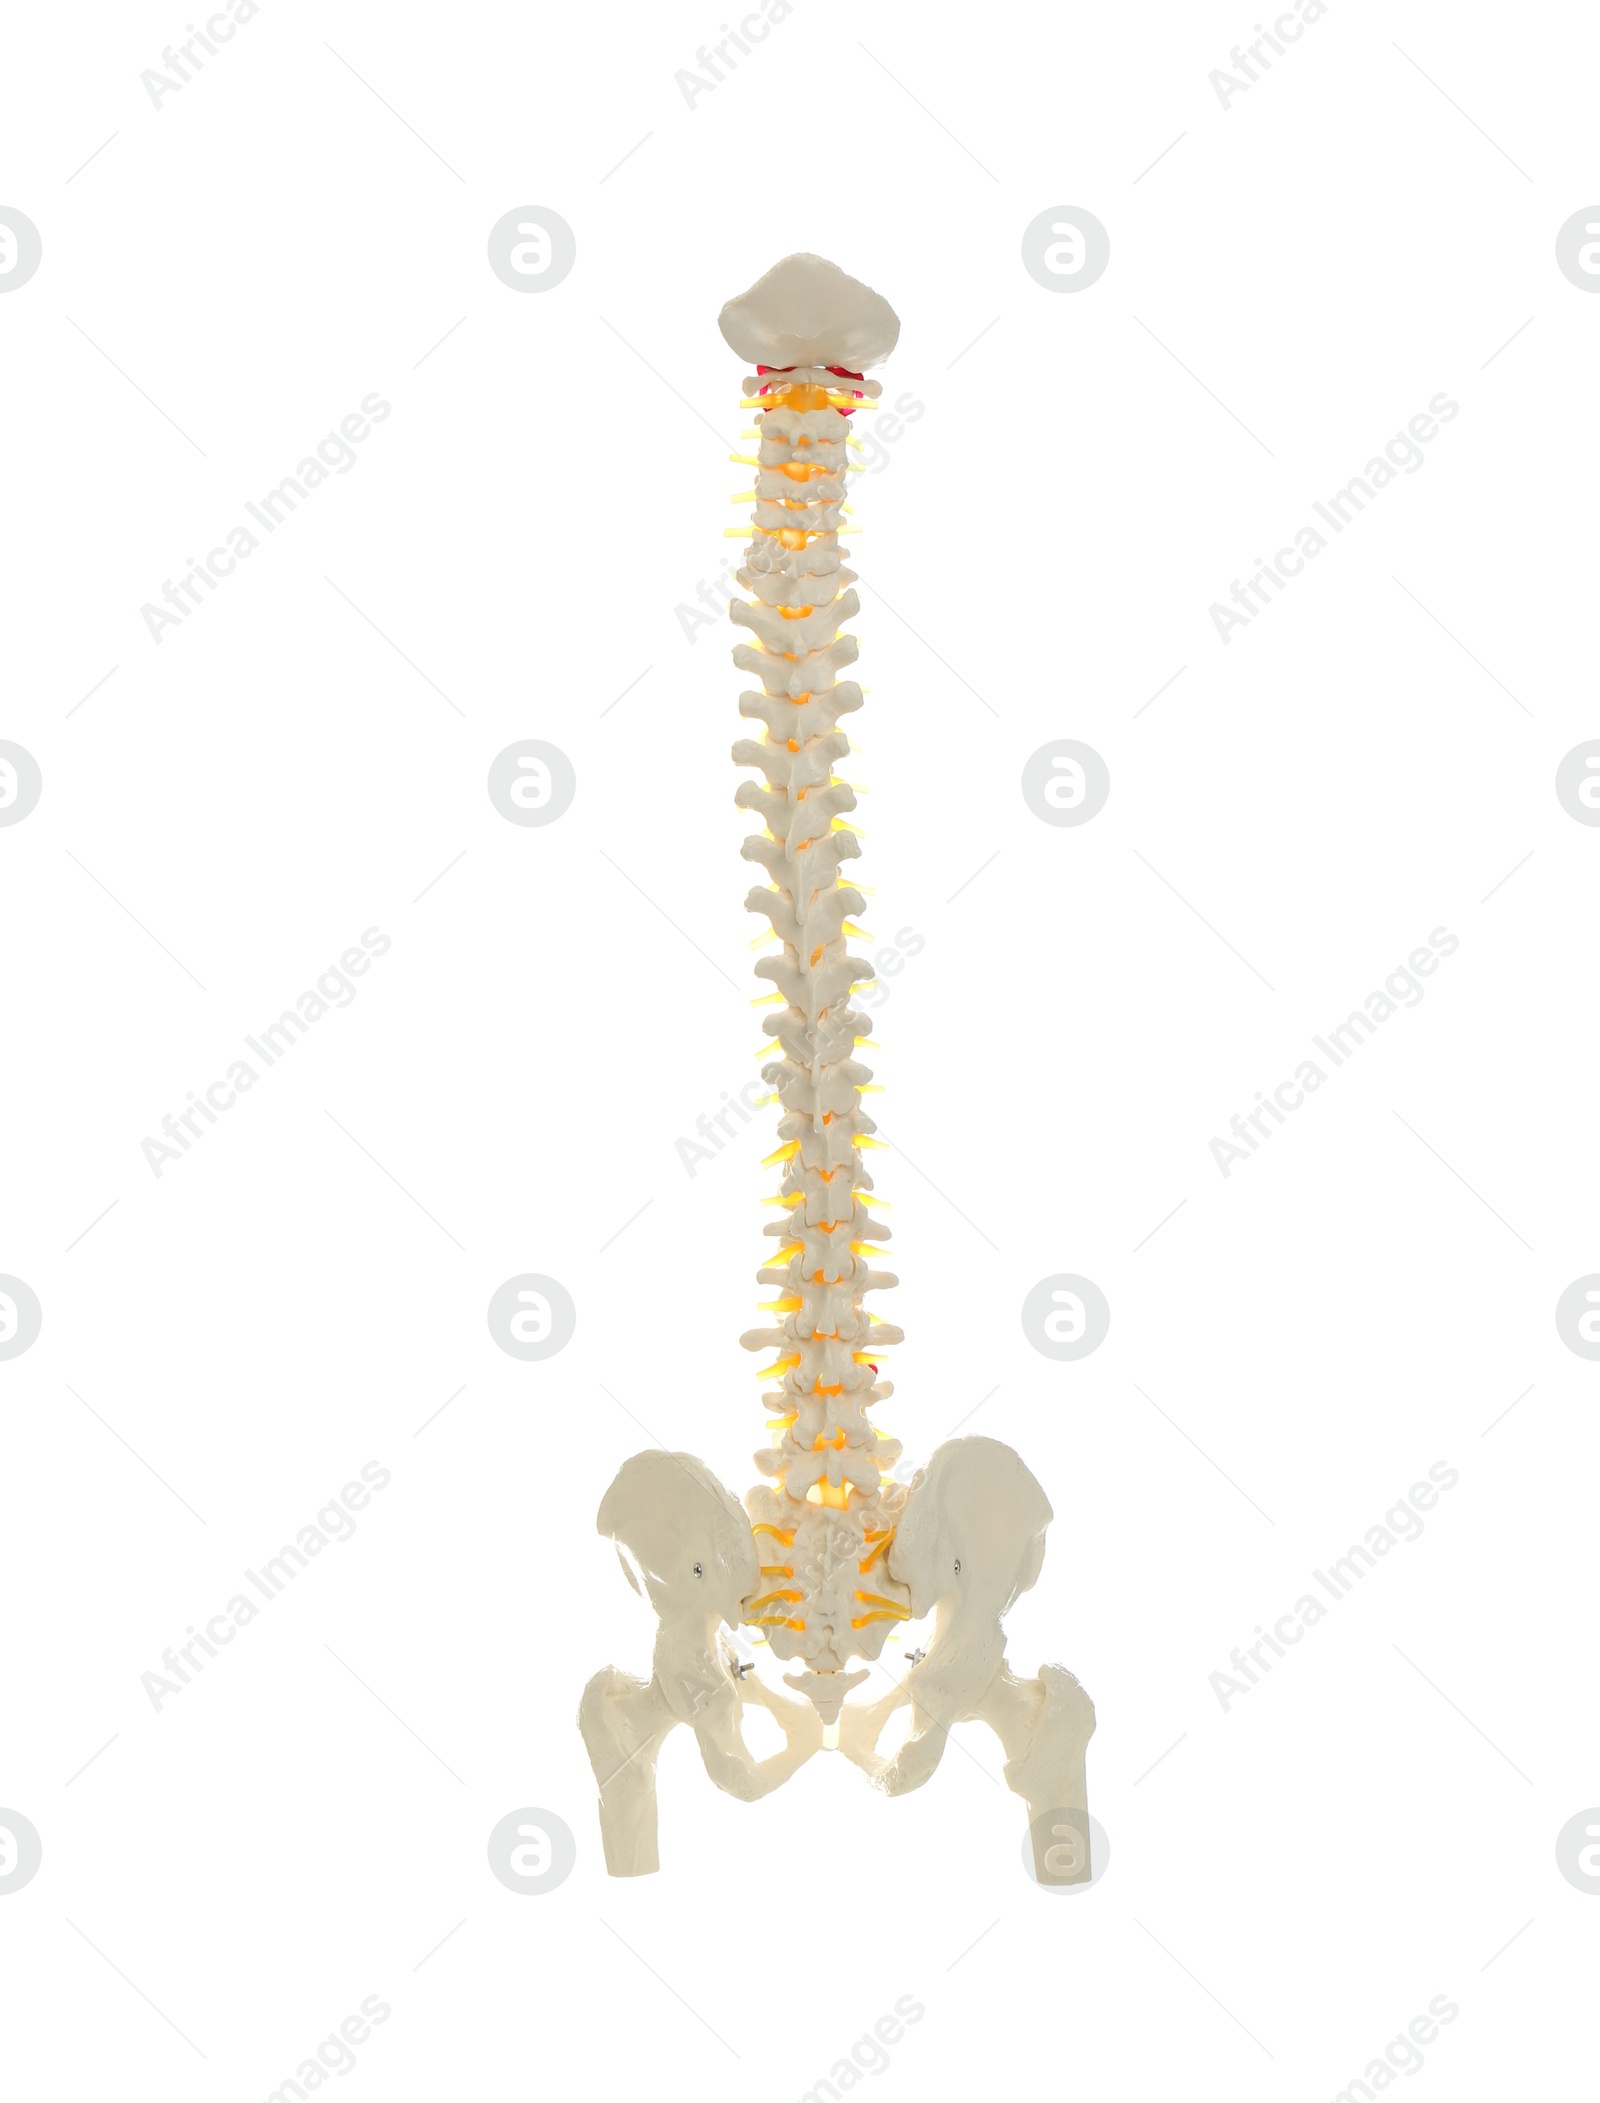 Photo of Artificial human spine model isolated on white